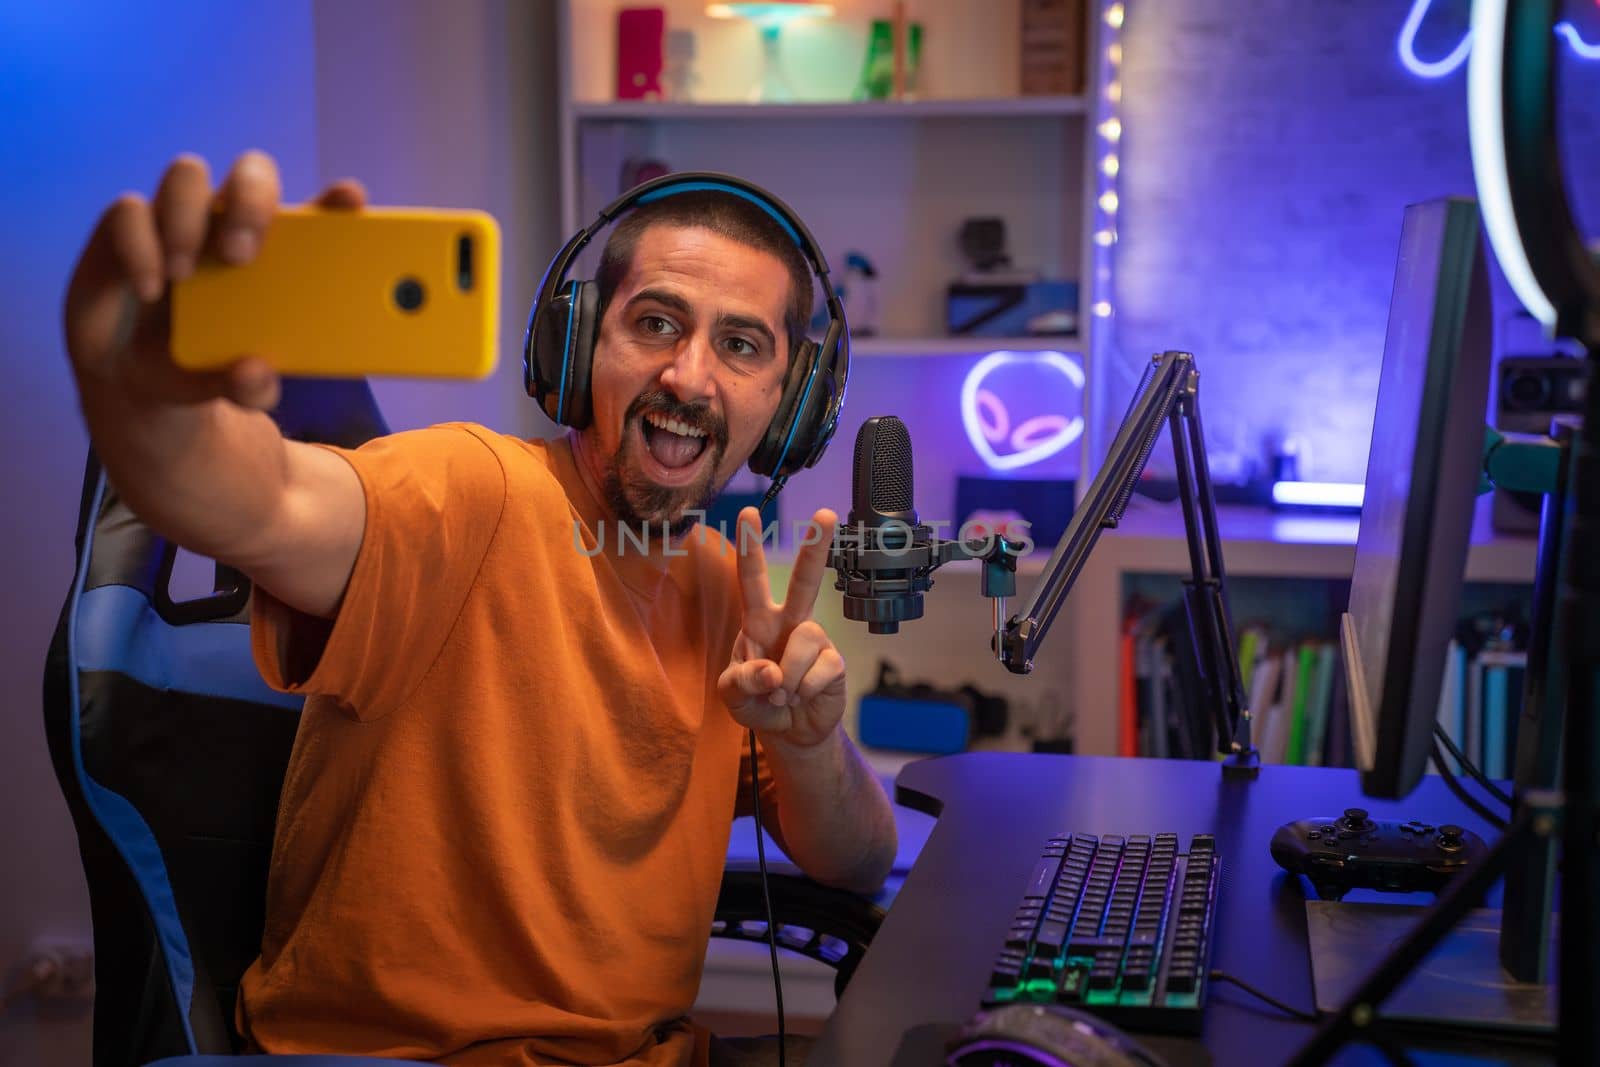 Gamer taking a selfie in gaming room playing online streaming games by PaulCarr